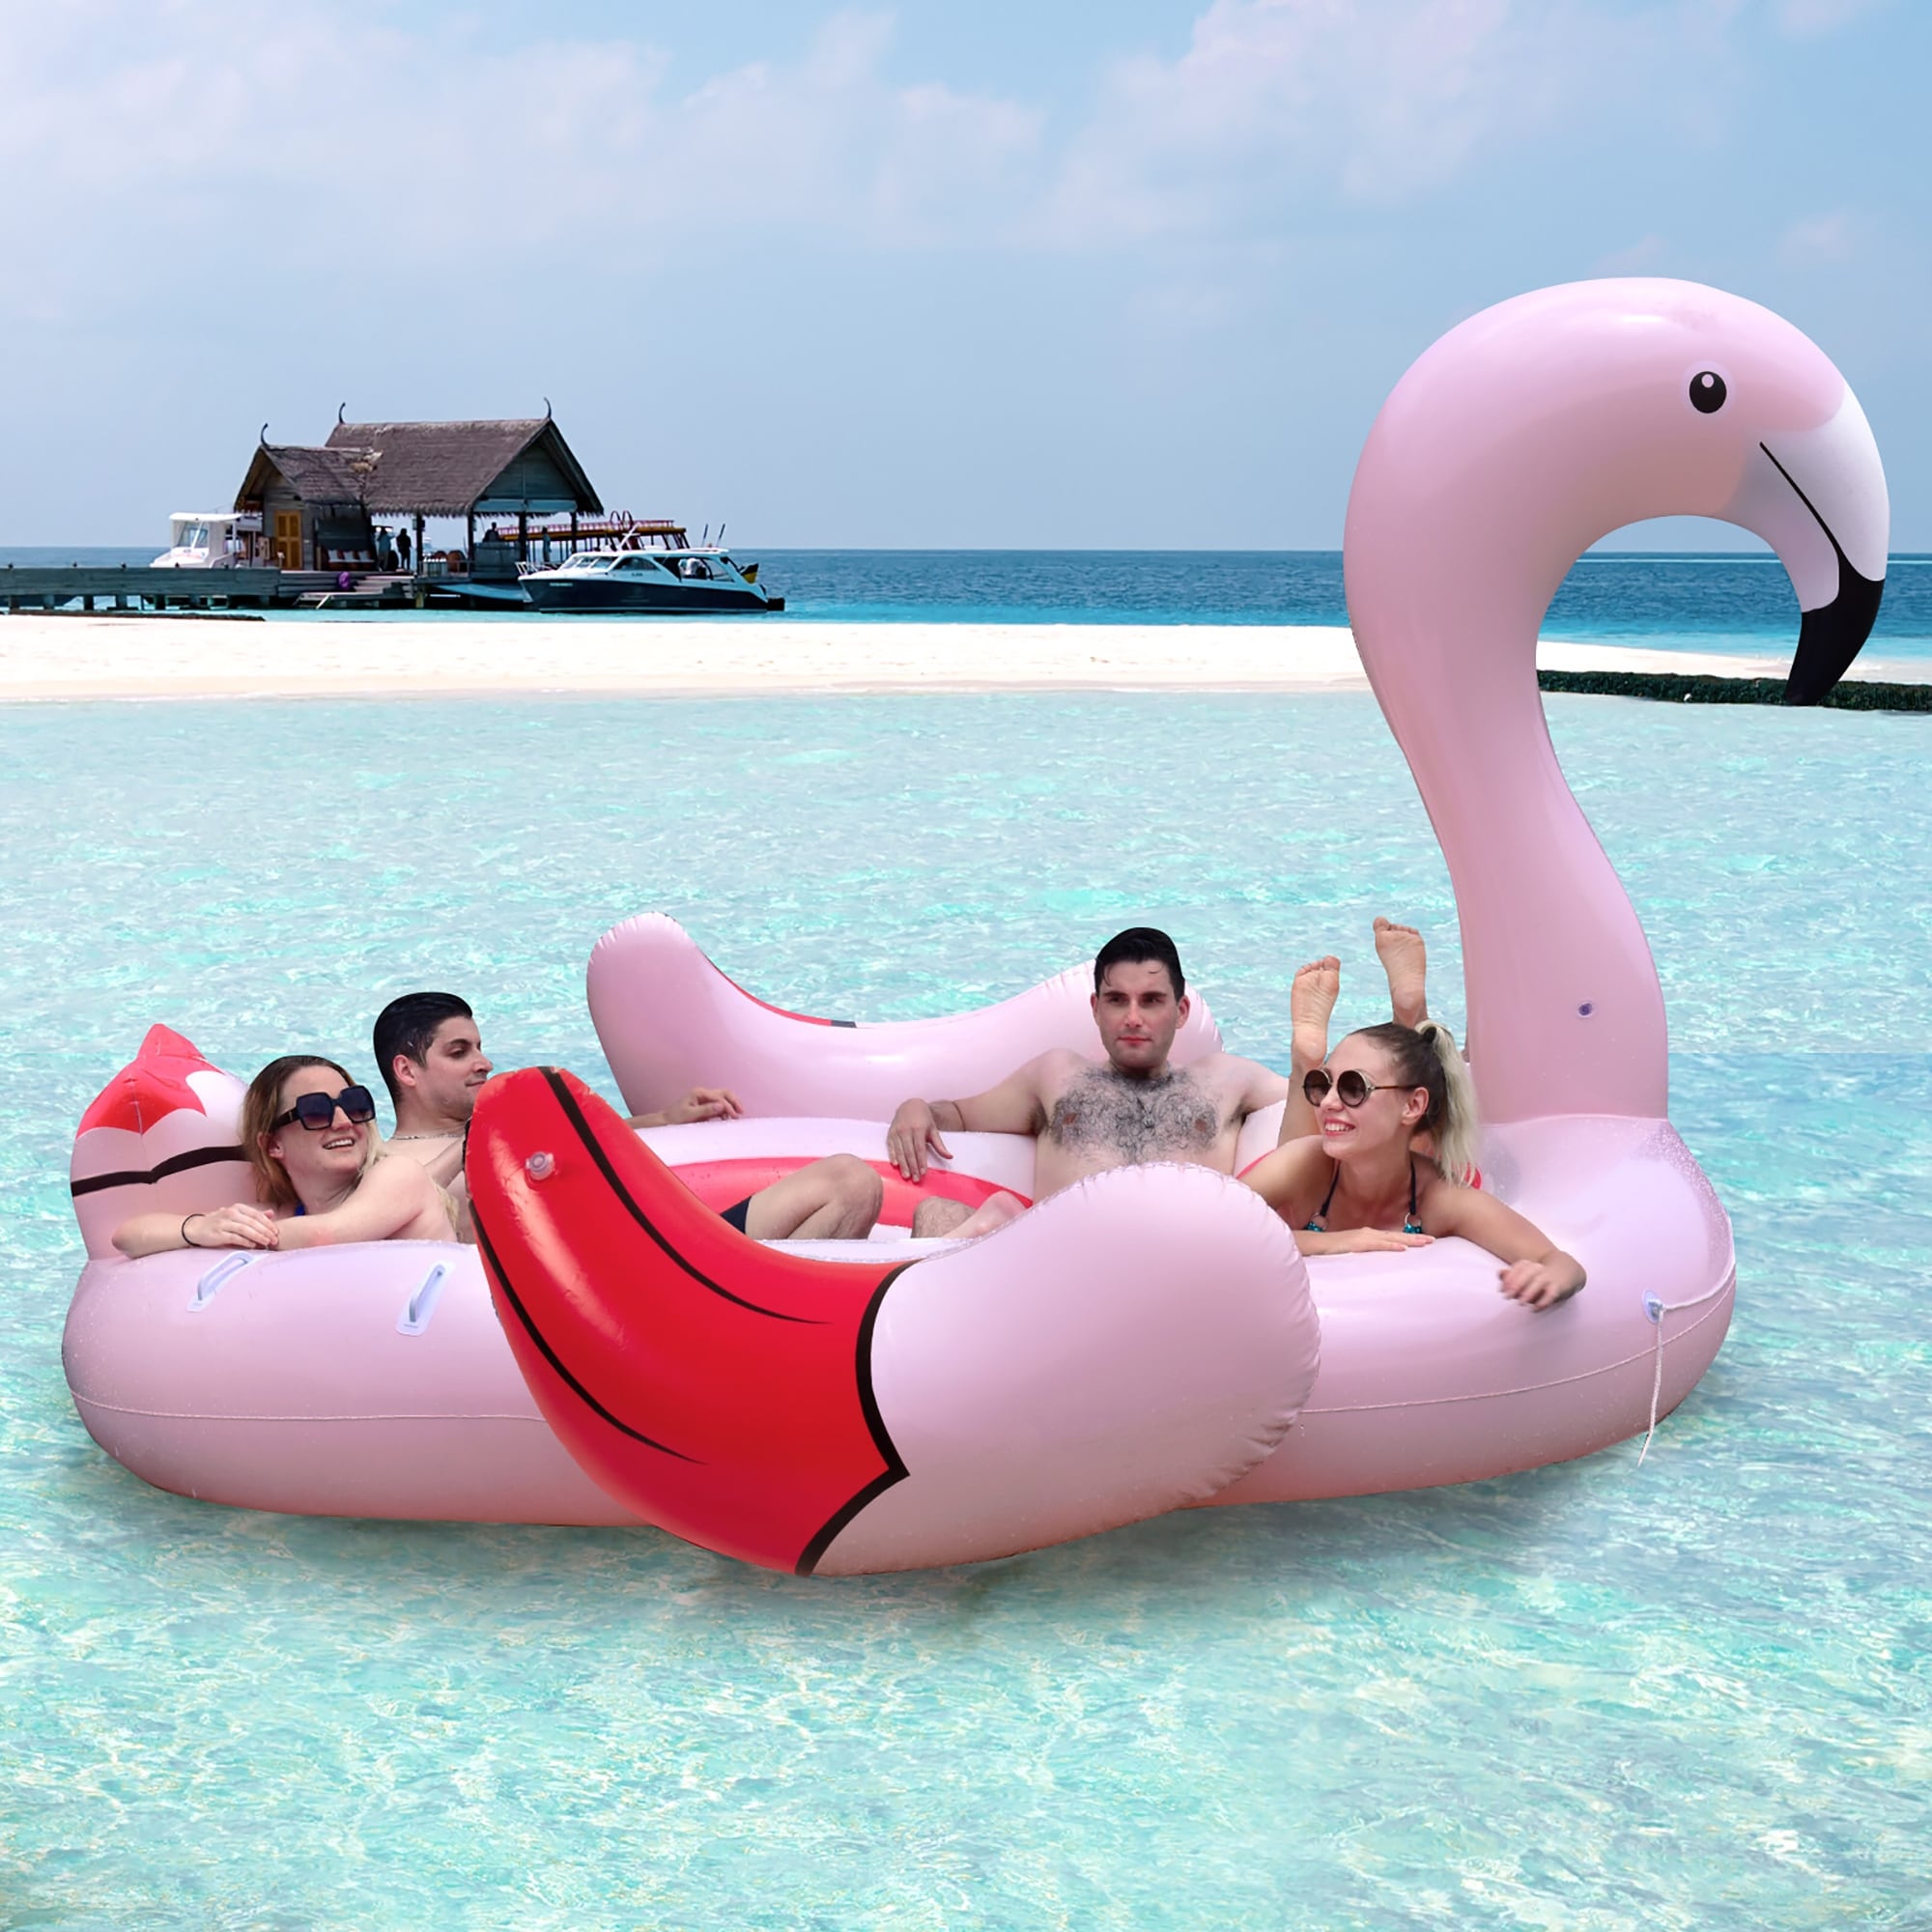 Inflatable Flamingo Pink Flamingo Pool Float Suitable for Adults and Children at The Beach or Family Pool